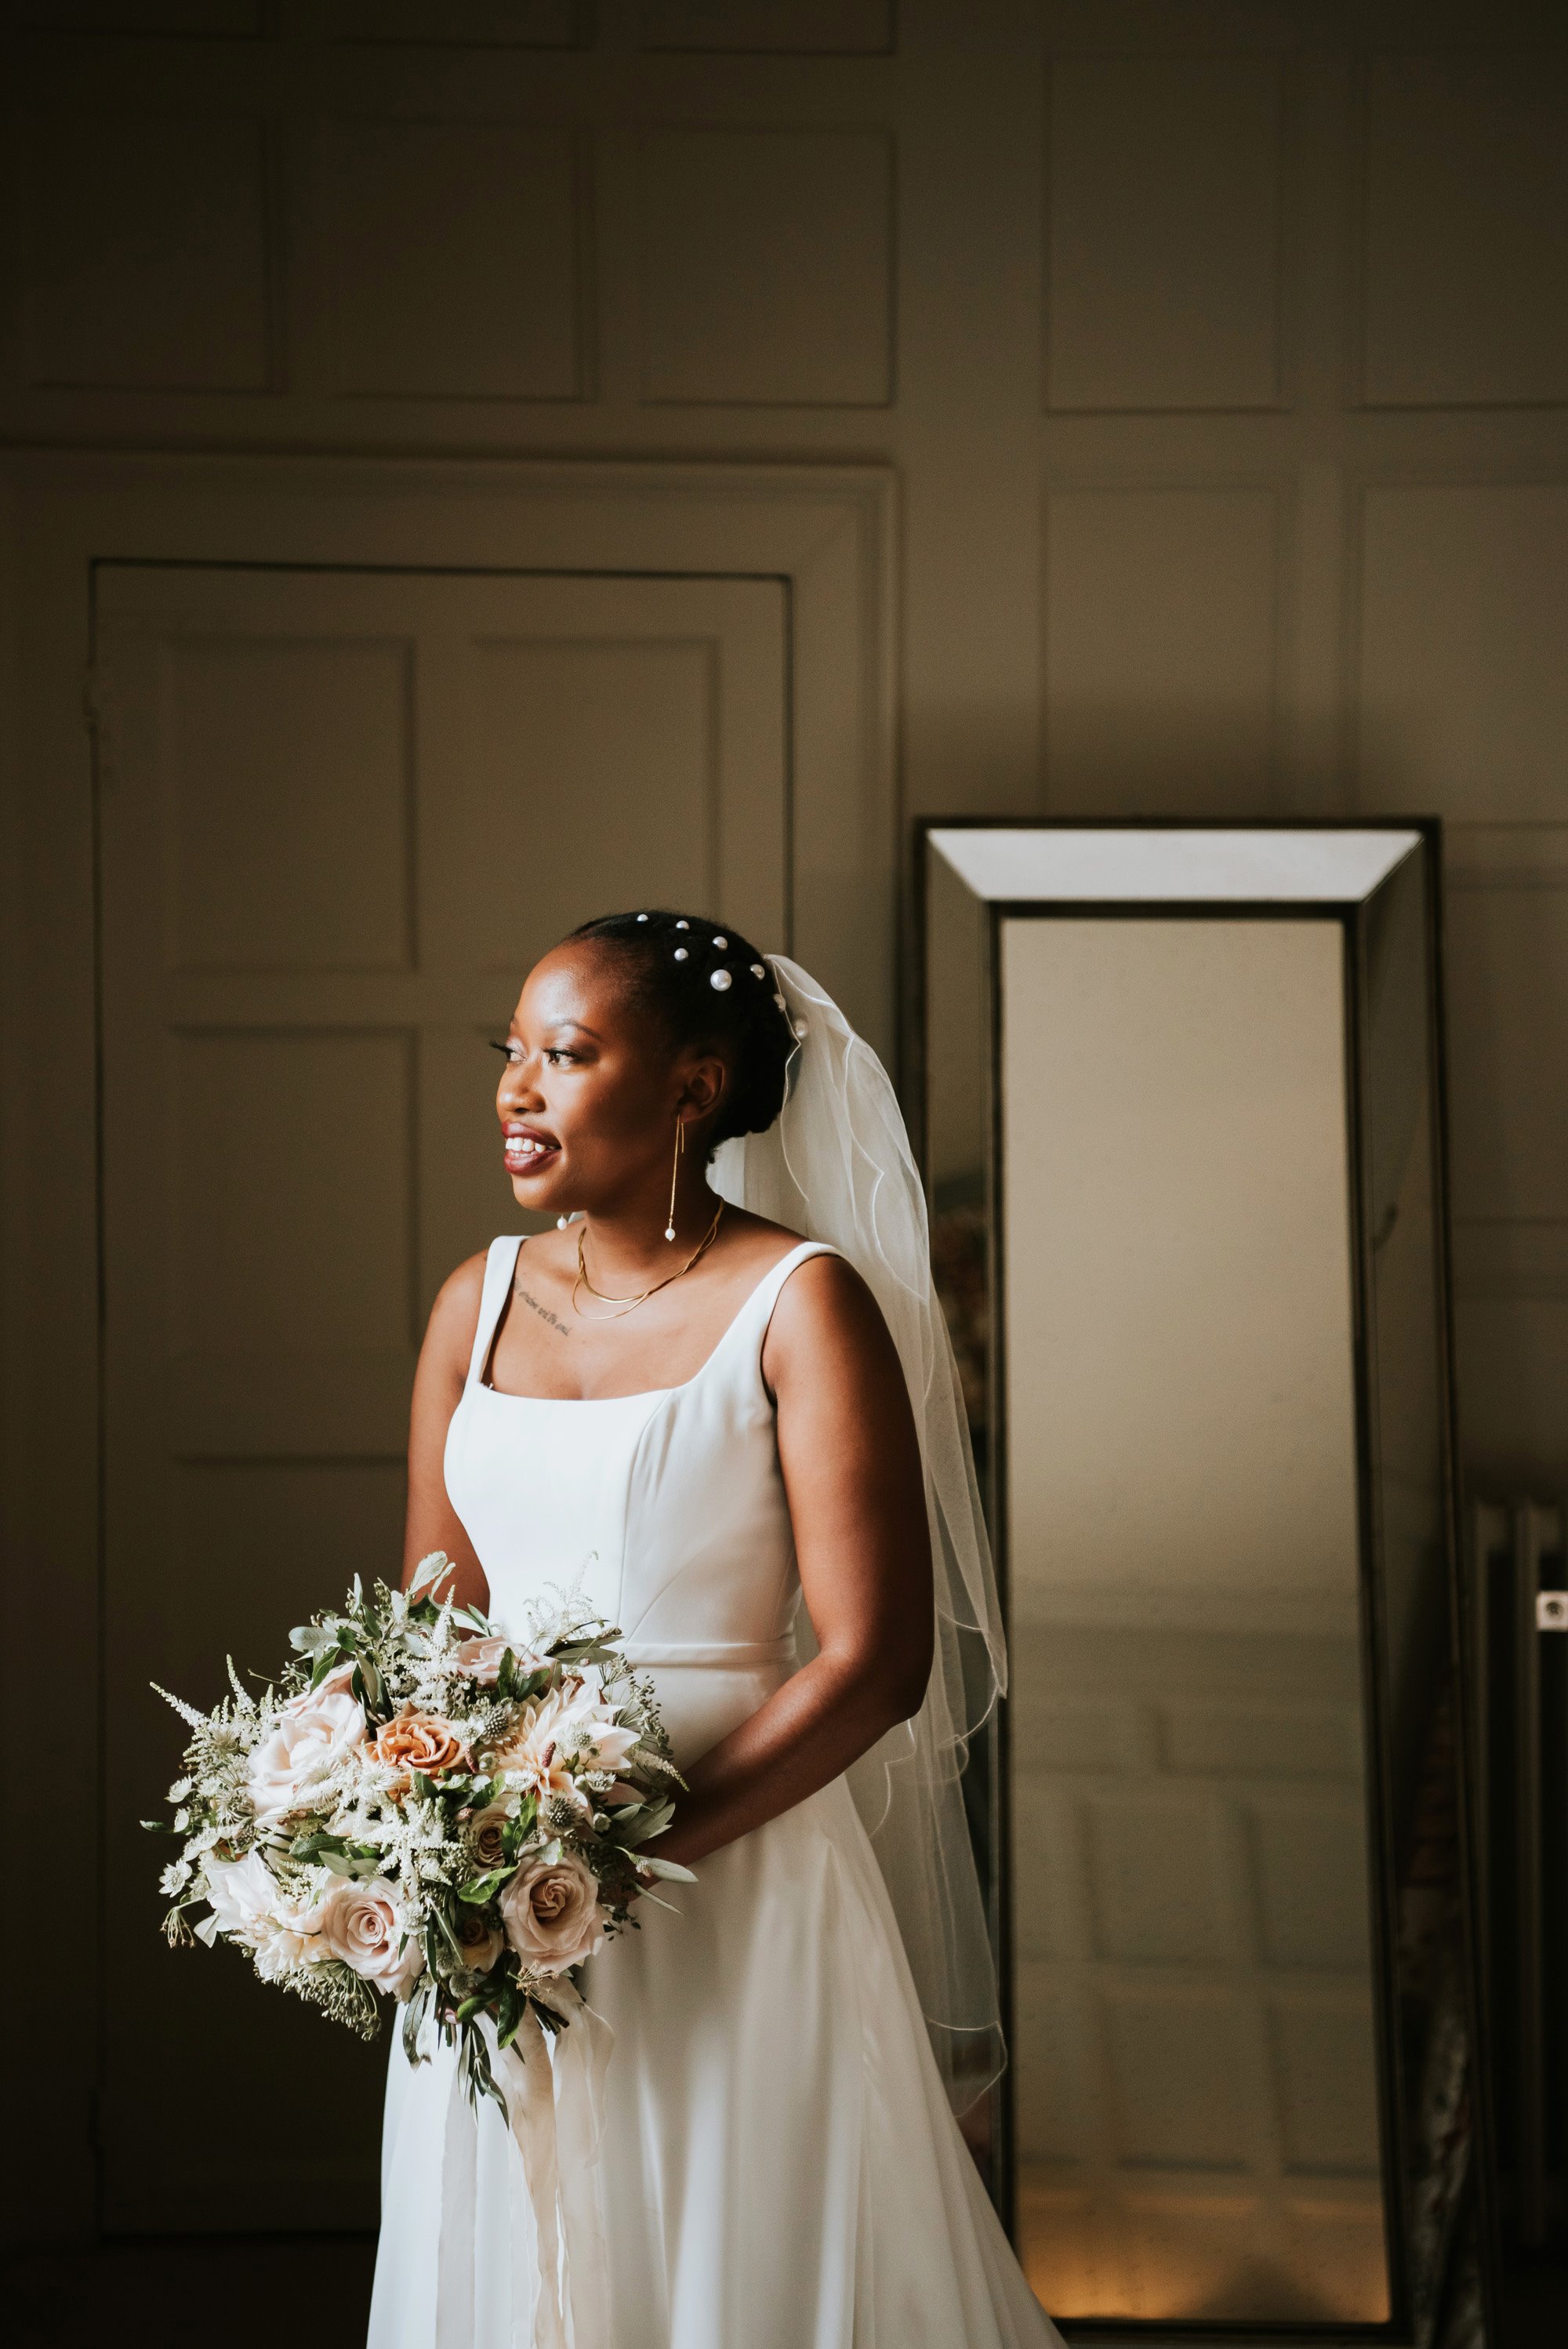 Modern black bride wearing simple satin dress with pearl earrings and pearl hair pins holding chic bouquet of pink roses and greenery